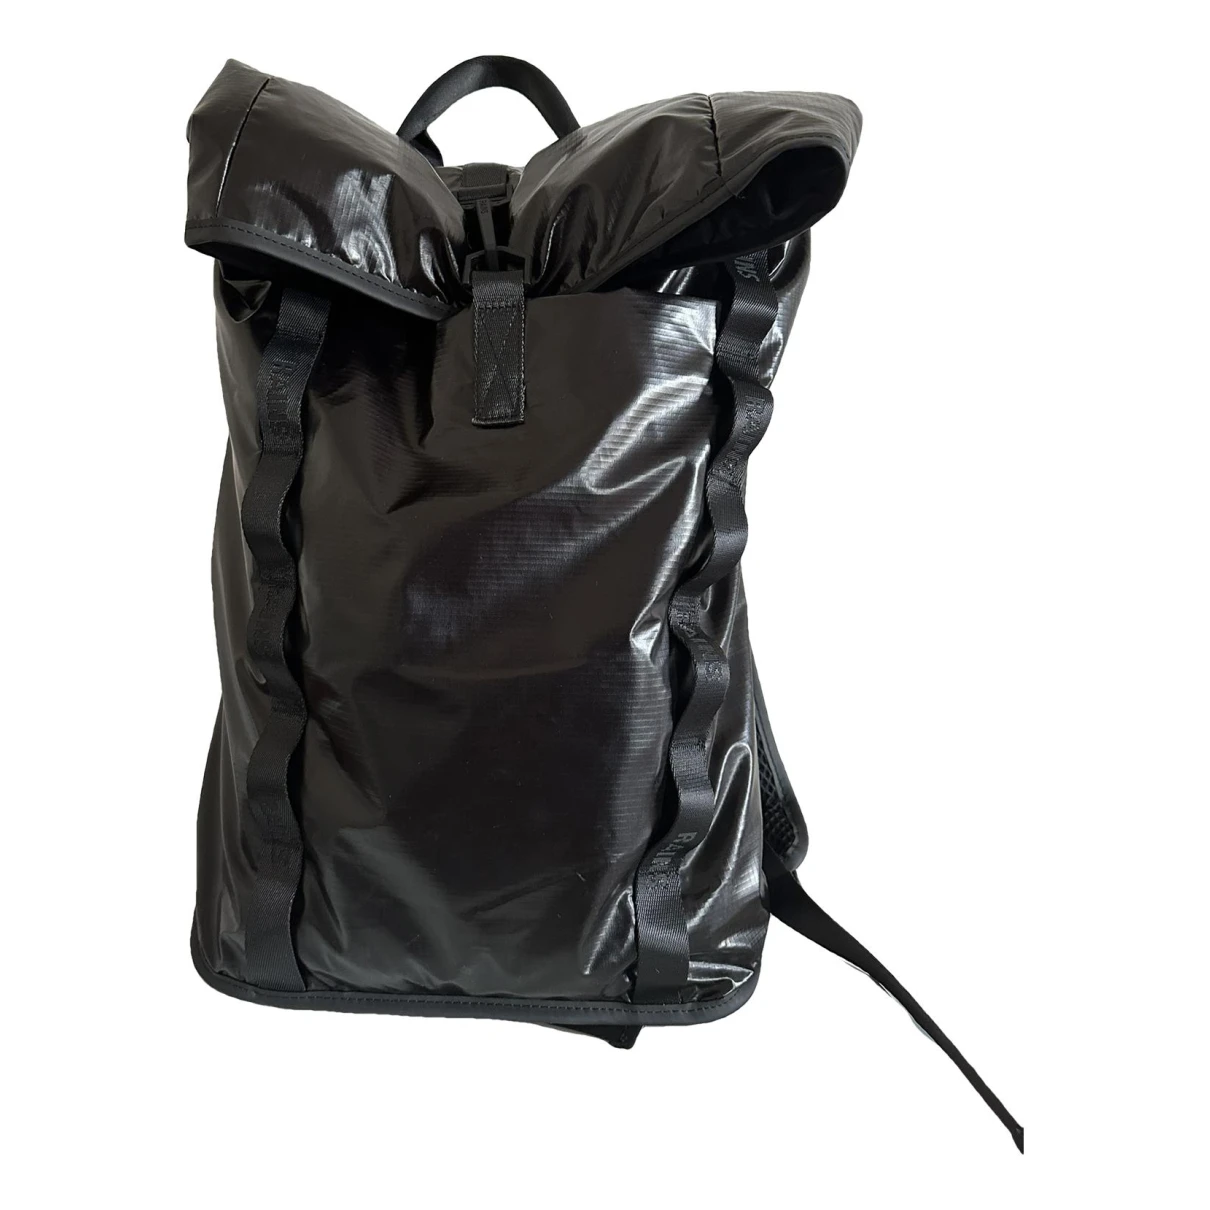 bags Rains backpacks for Female Synthetic. Used condition